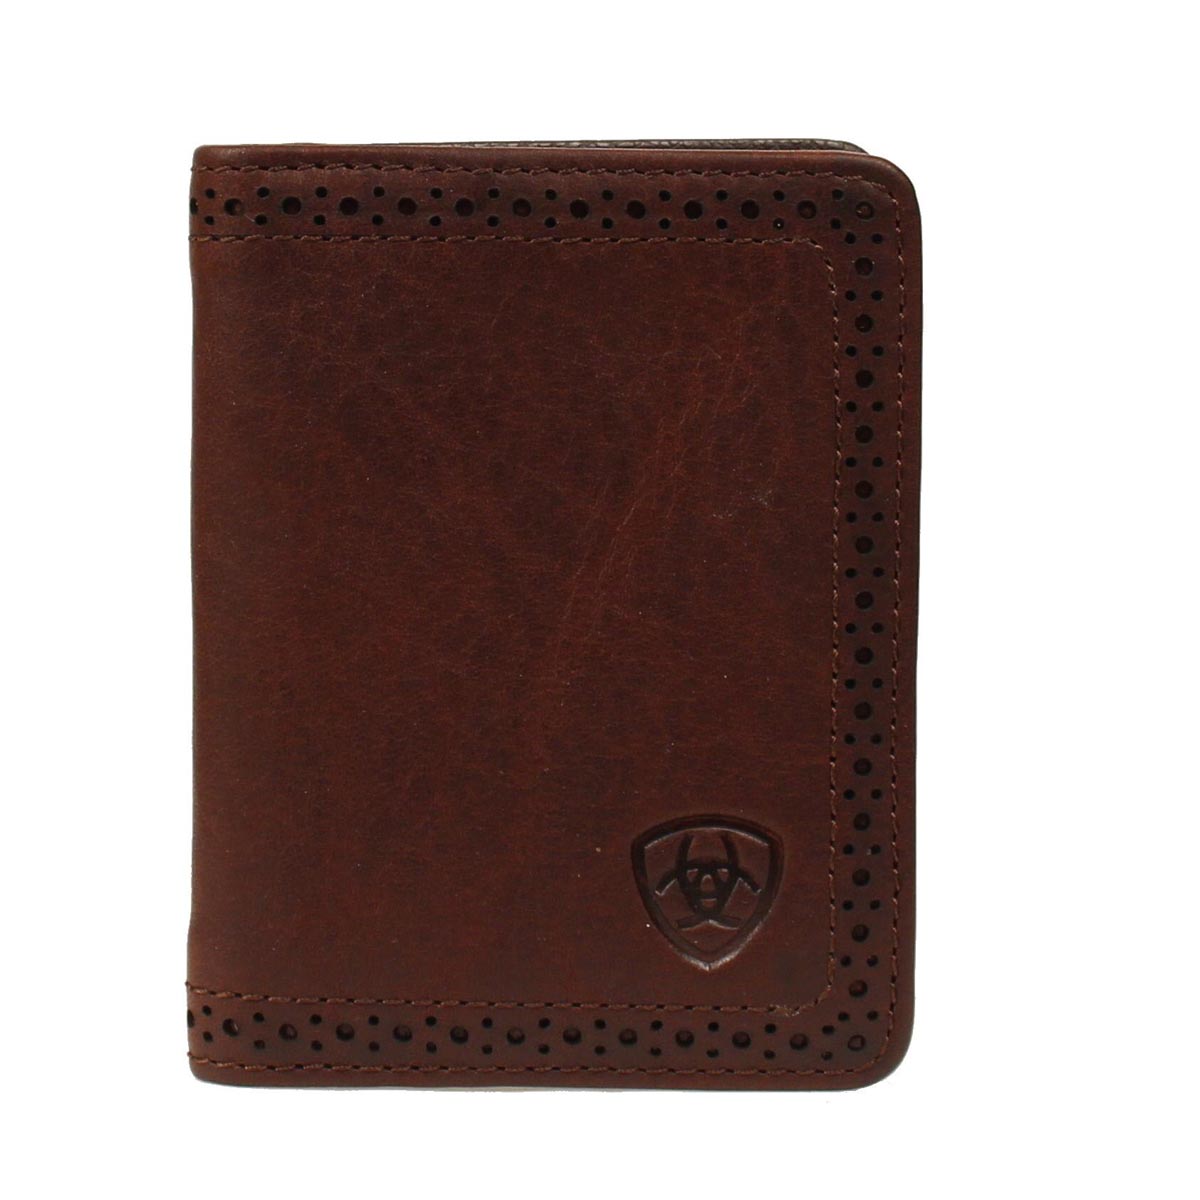 Ariat Western Mens Wallet Leather Bifold Perforated Copper A35128283 | eBay